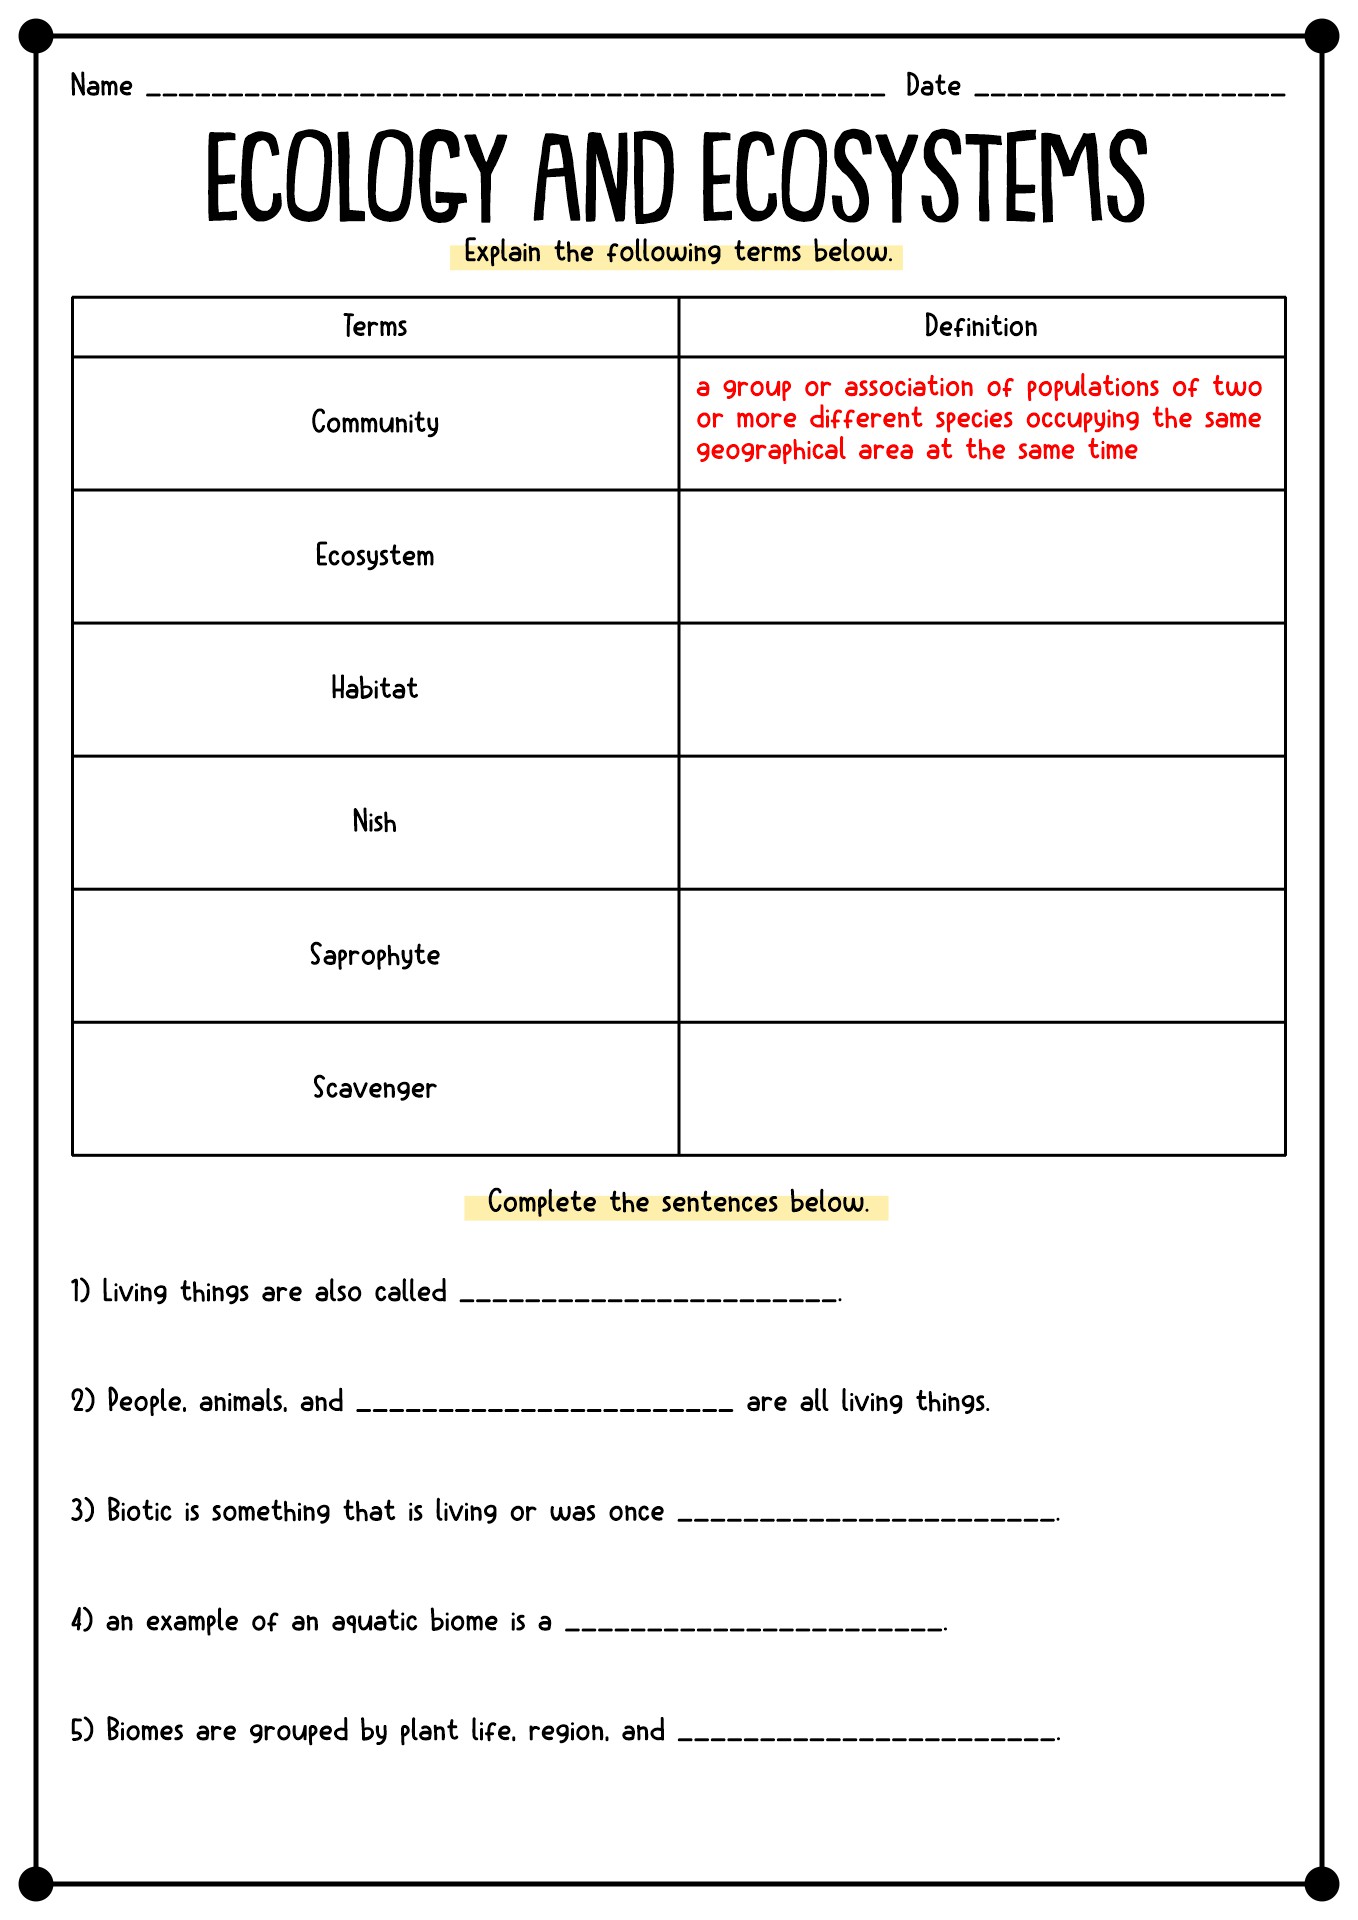 Ecology and Ecosystems Worksheets